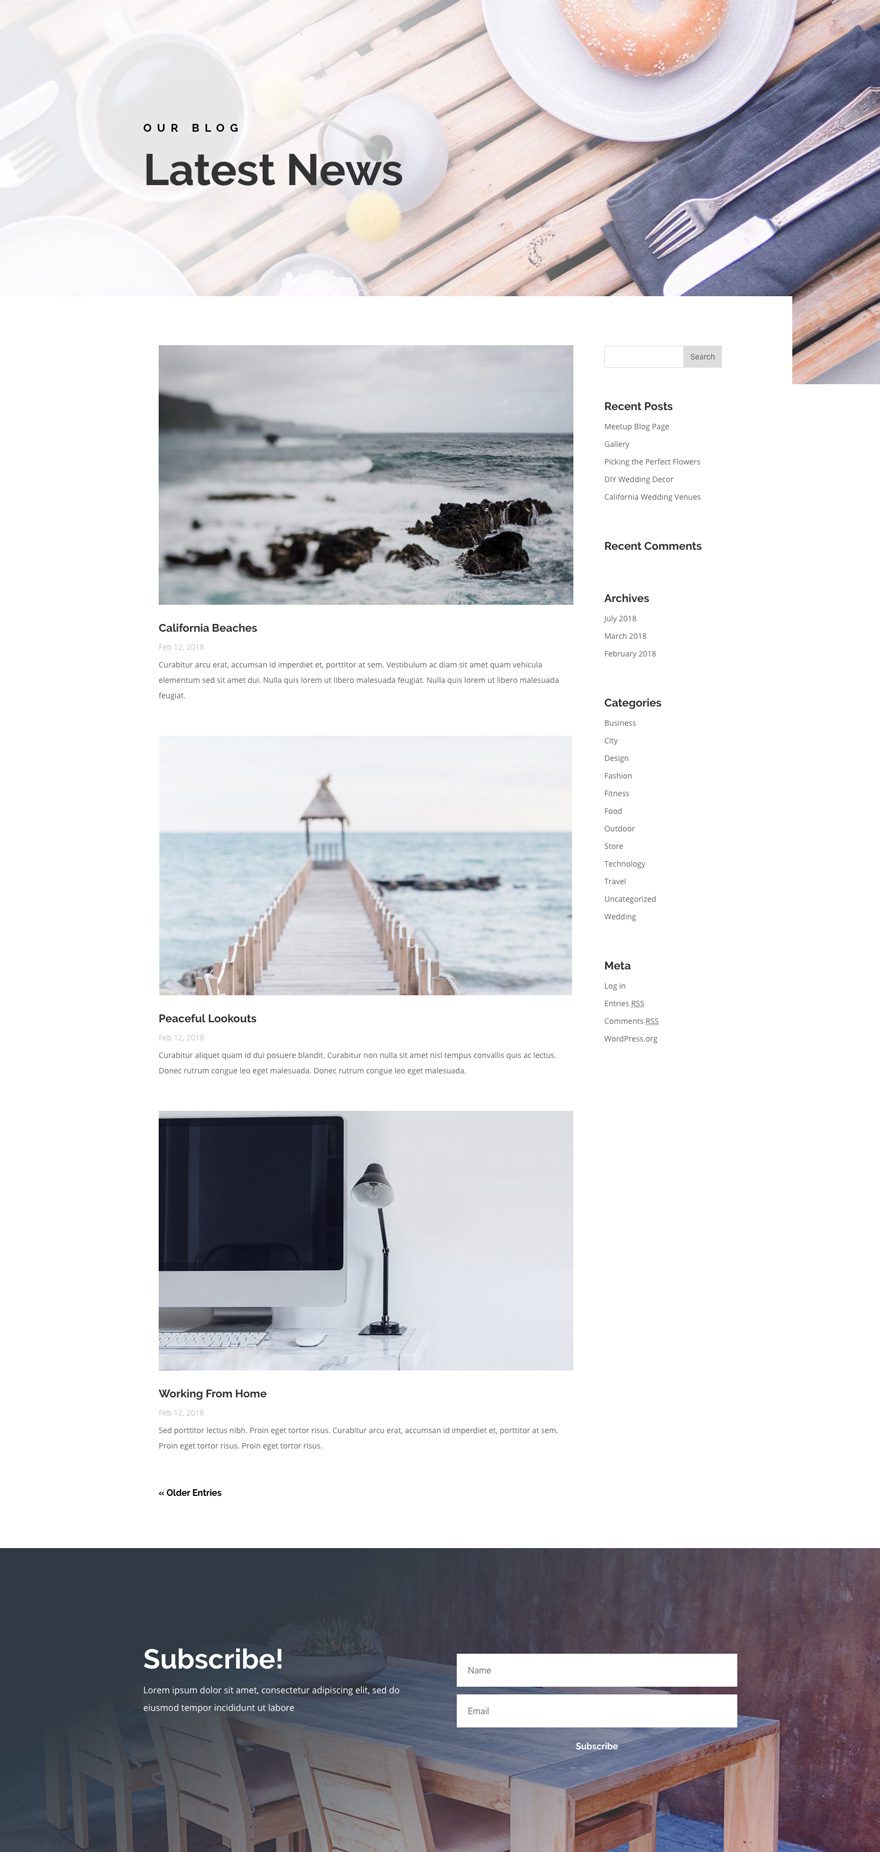 divi bed and breakfast layout pack